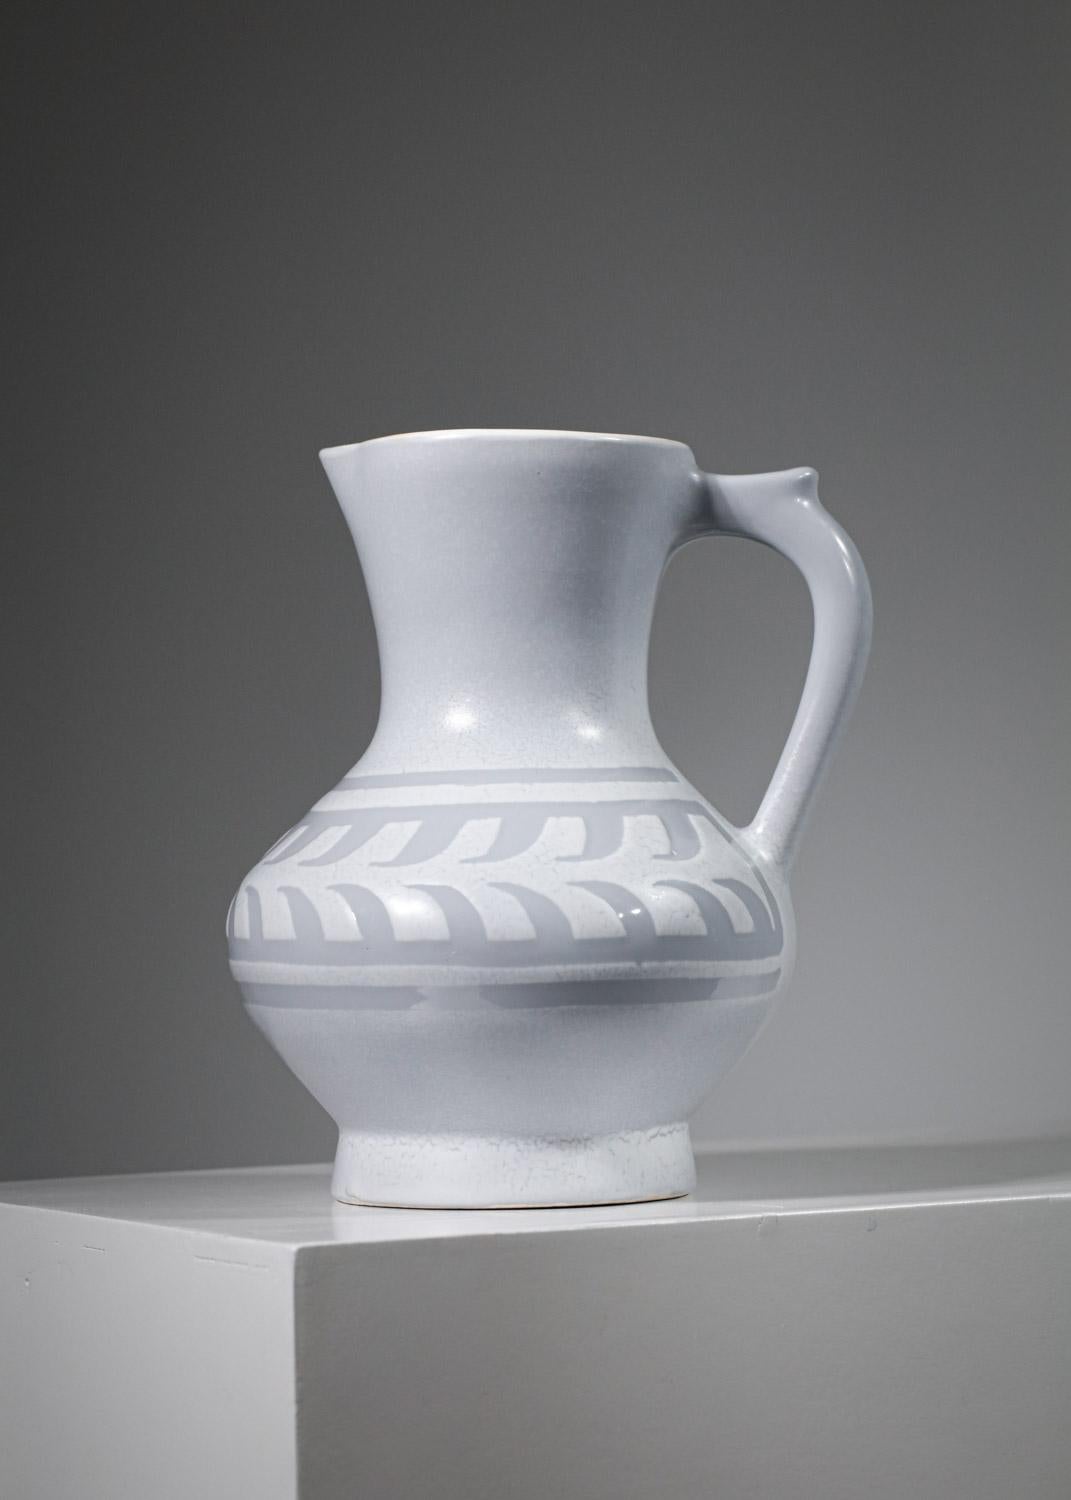 Mid-20th Century Roger Capron ceramic French pitcher pichet vallauris vase 60's - G653 For Sale